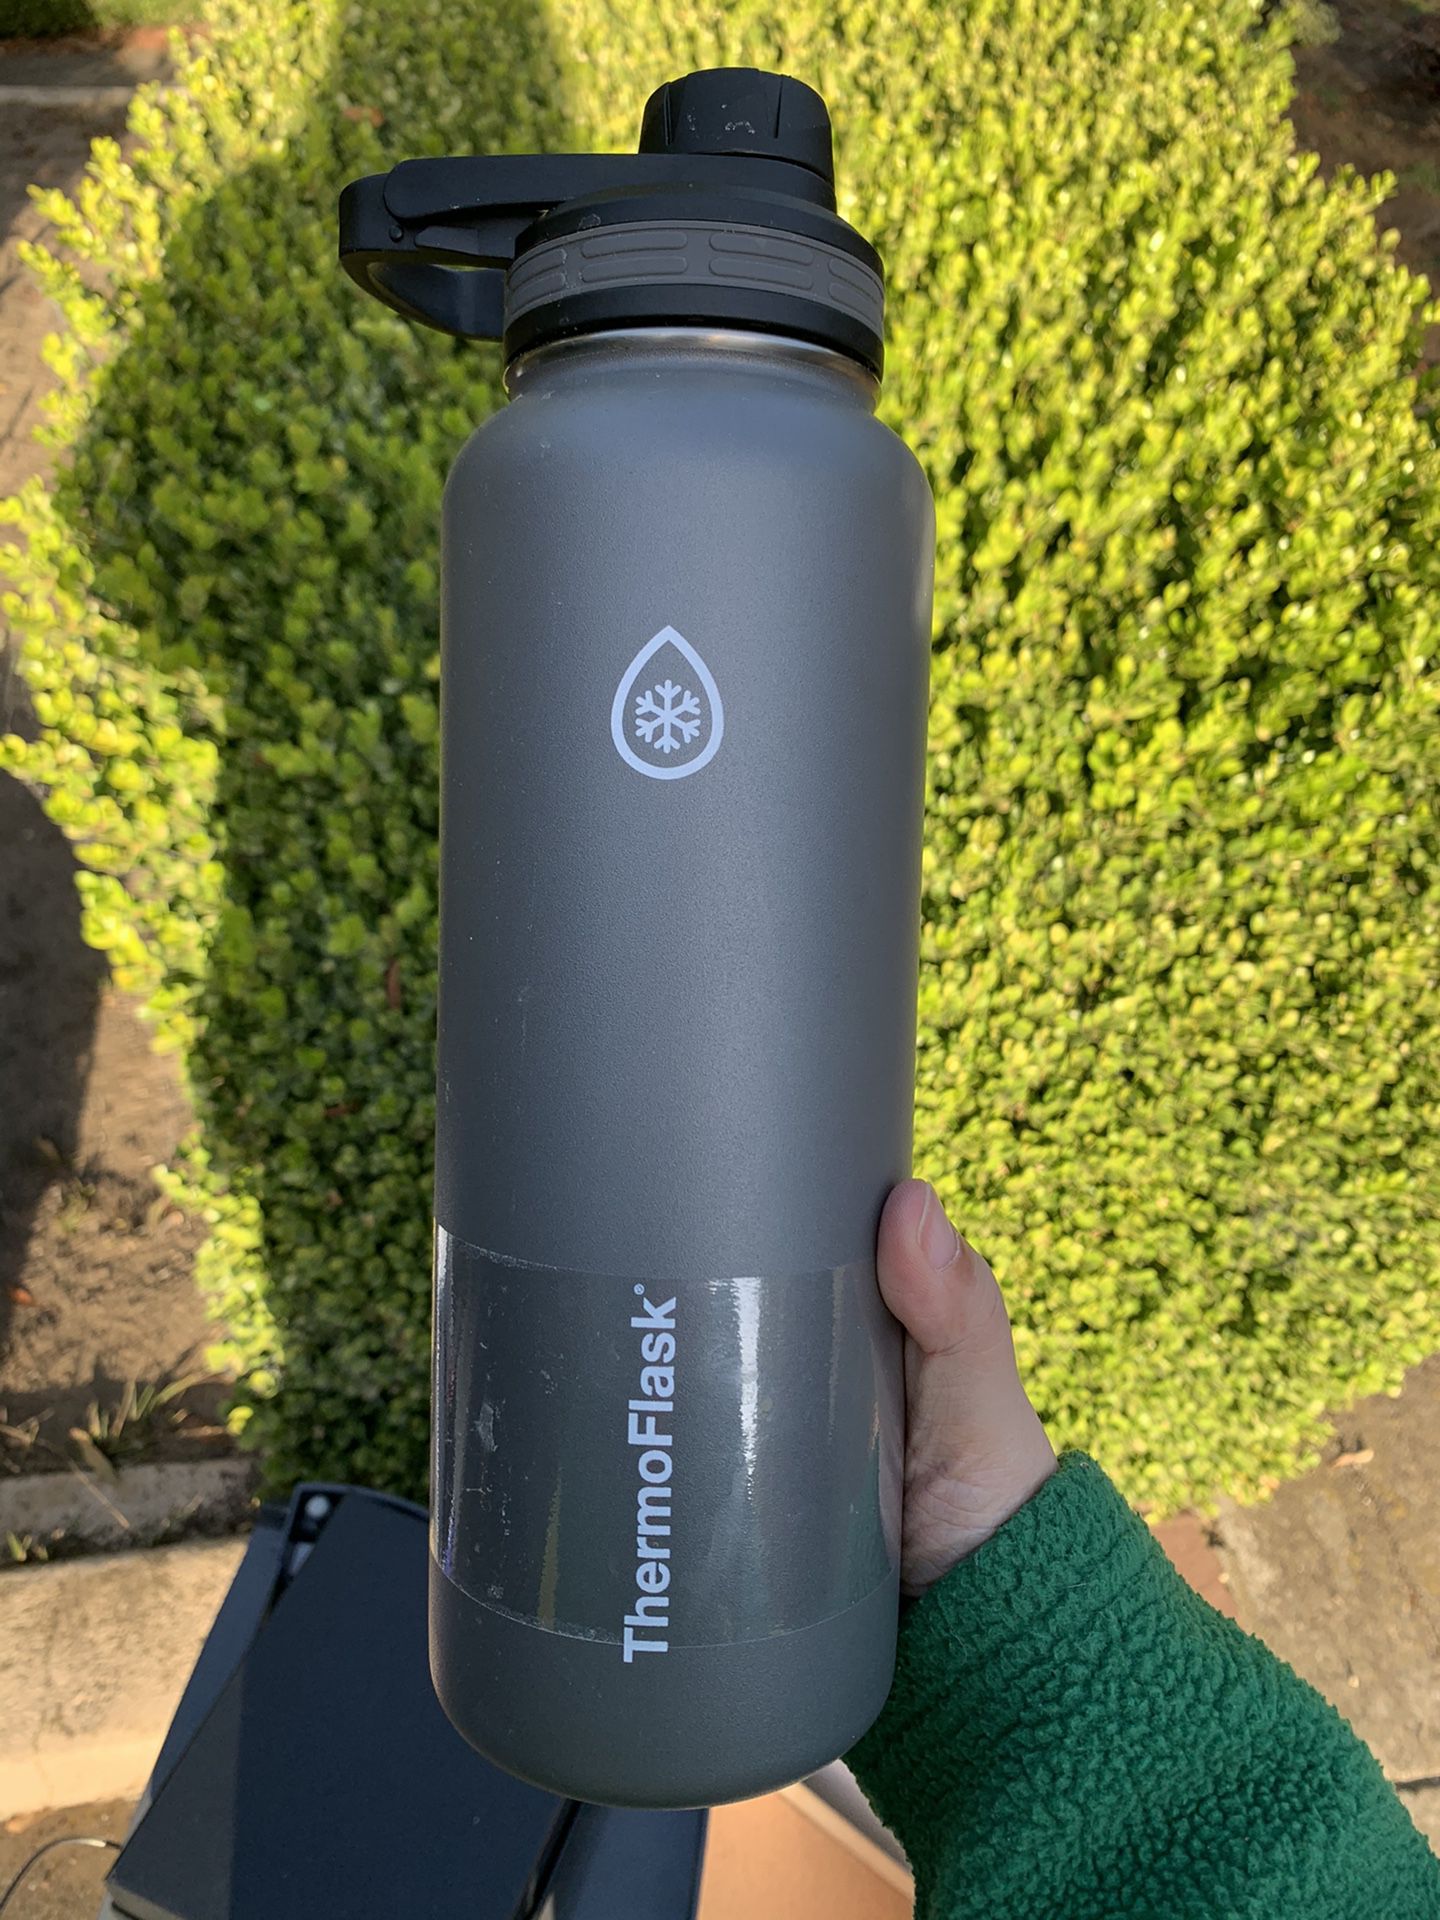 Thermoflask 40oz water bottle